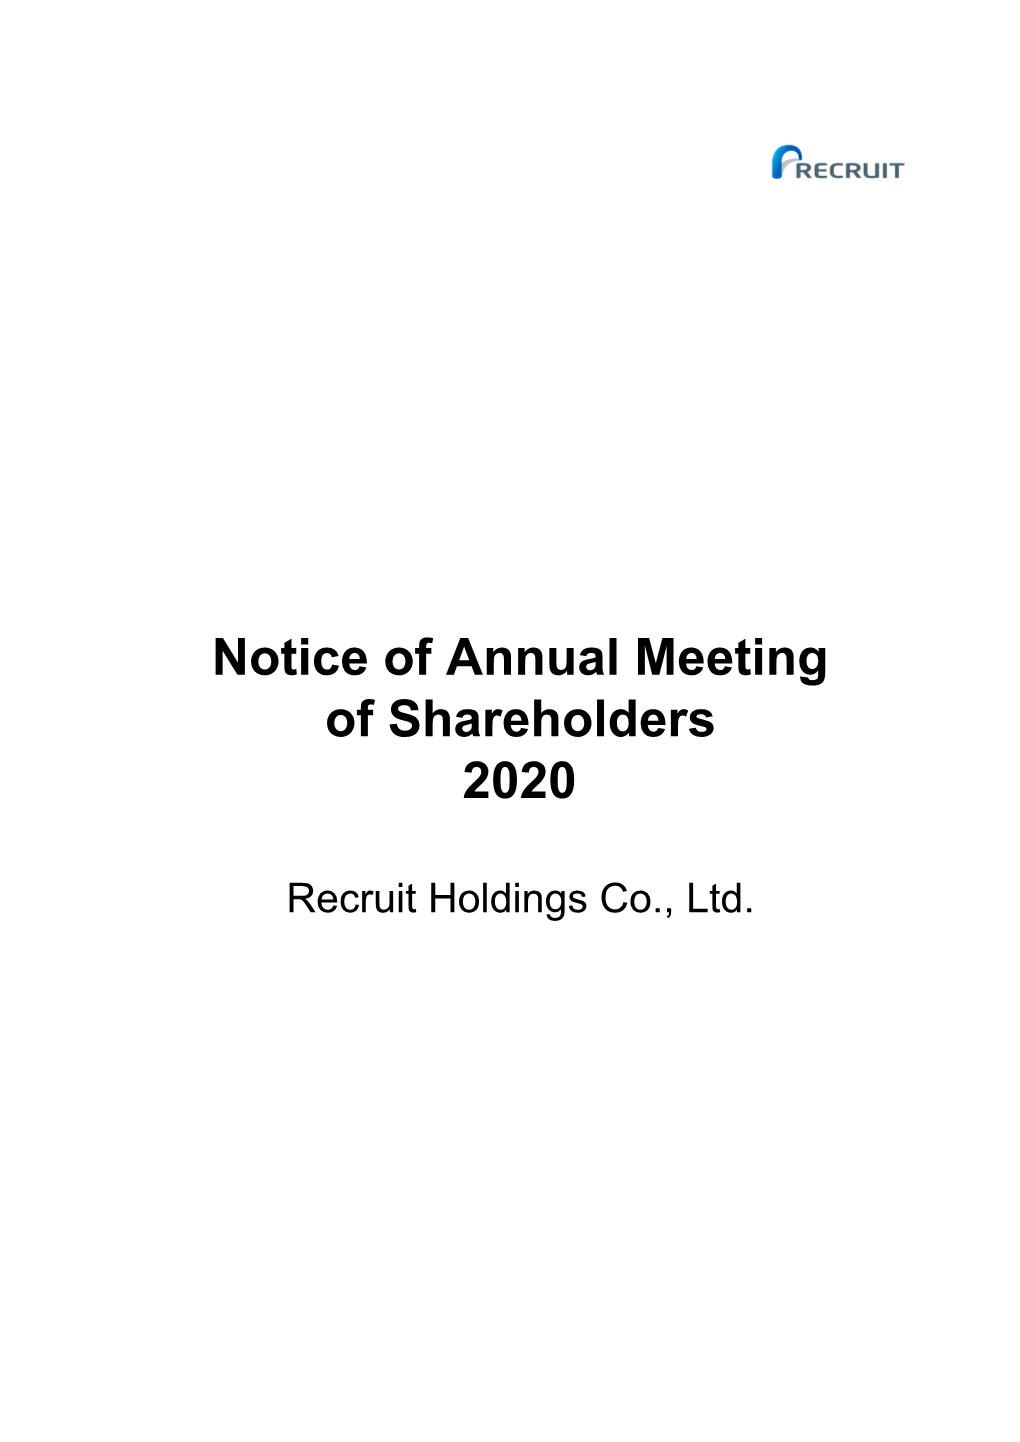 Notice of Annual Meeting of Shareholders 2020 Recruit Holdings Co., Ltd